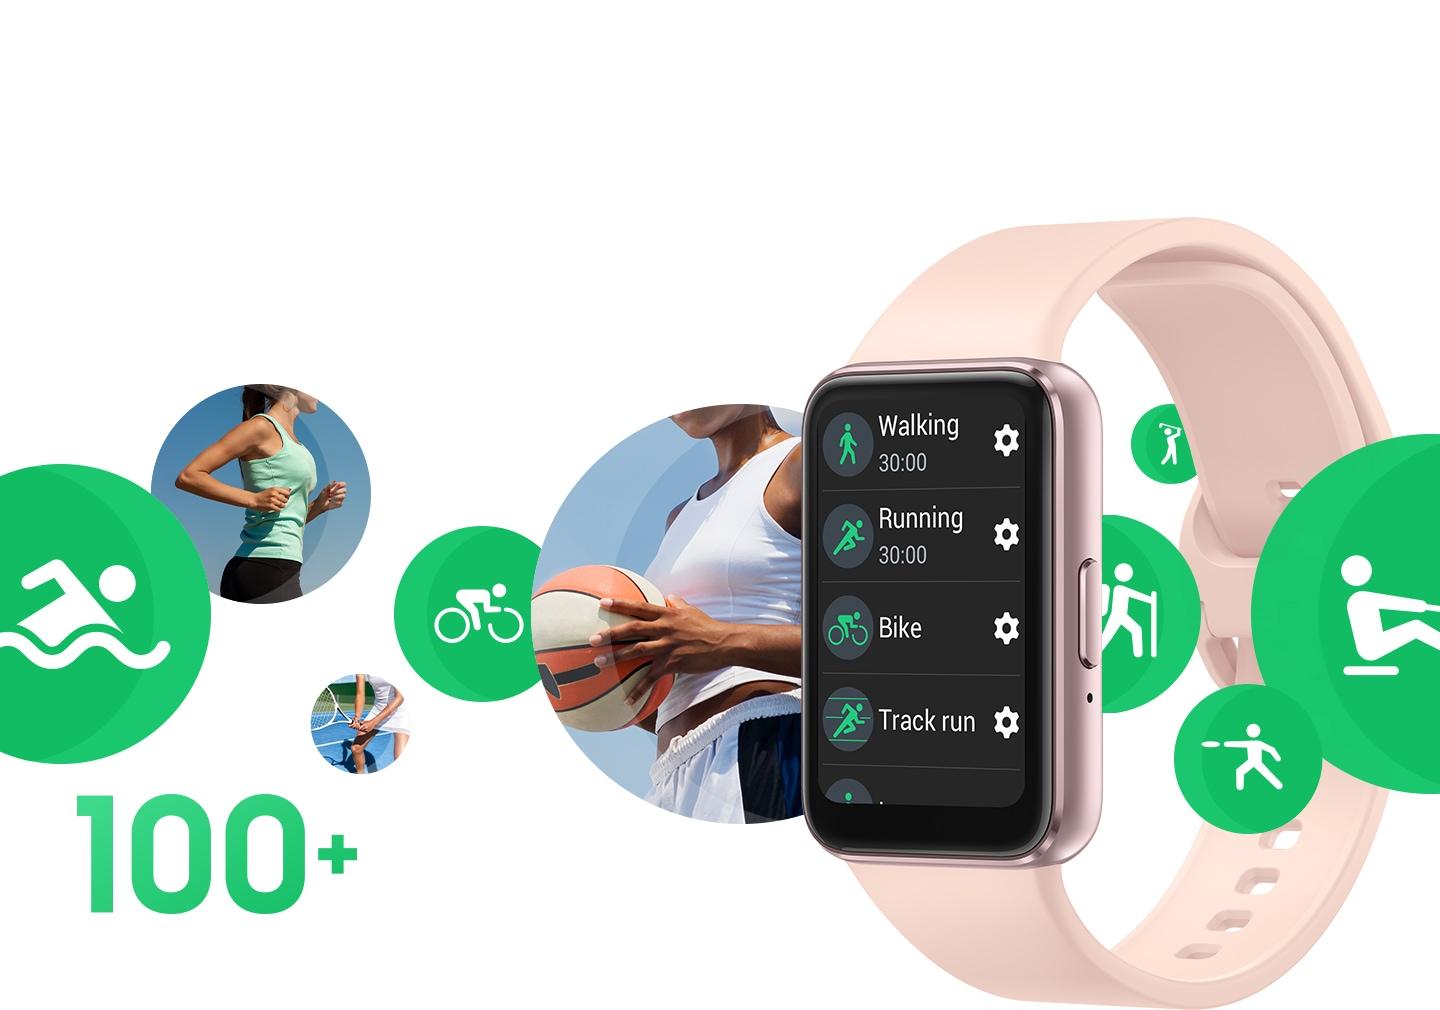 Galaxy Fit3 with multiple workout mode icons, including bike and pool swim, gliding across the device.